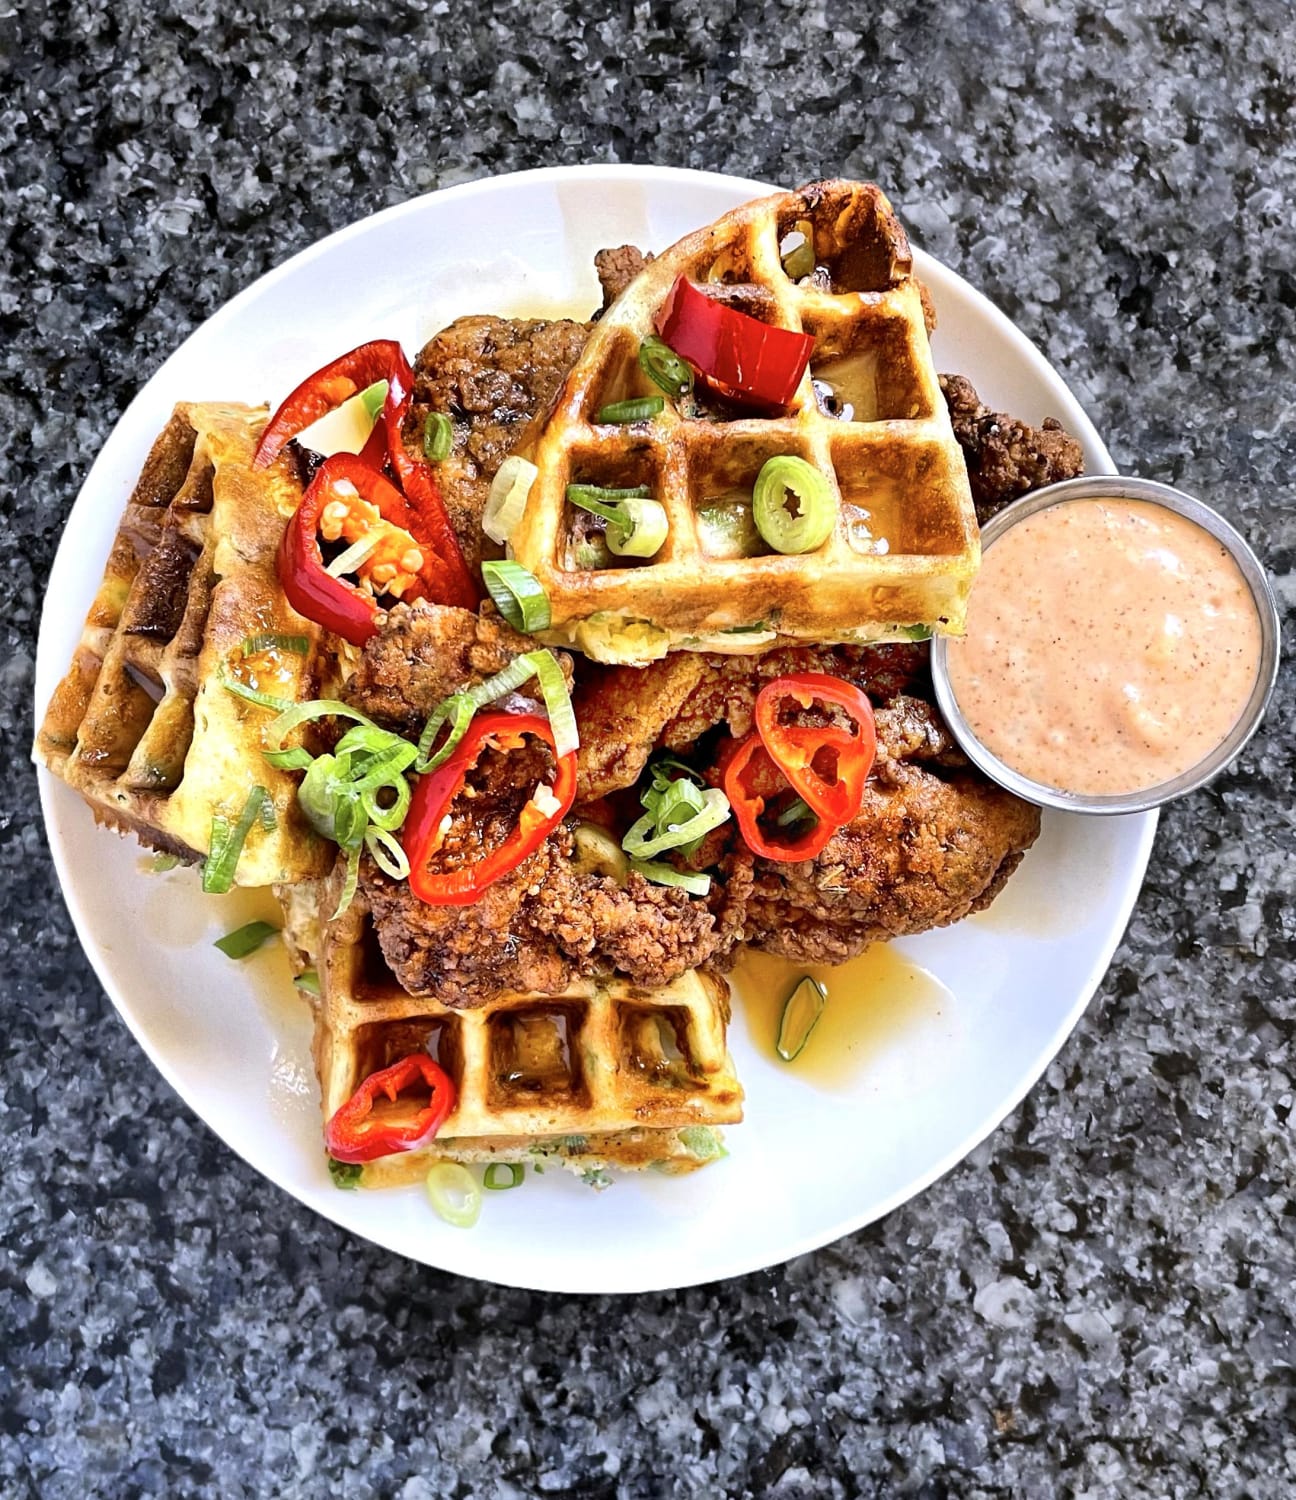 [Homemade] Fried chicken and jalapeno/cheddar/scallion waffles with spicy honey butter drizzle and pickled fresno chilis